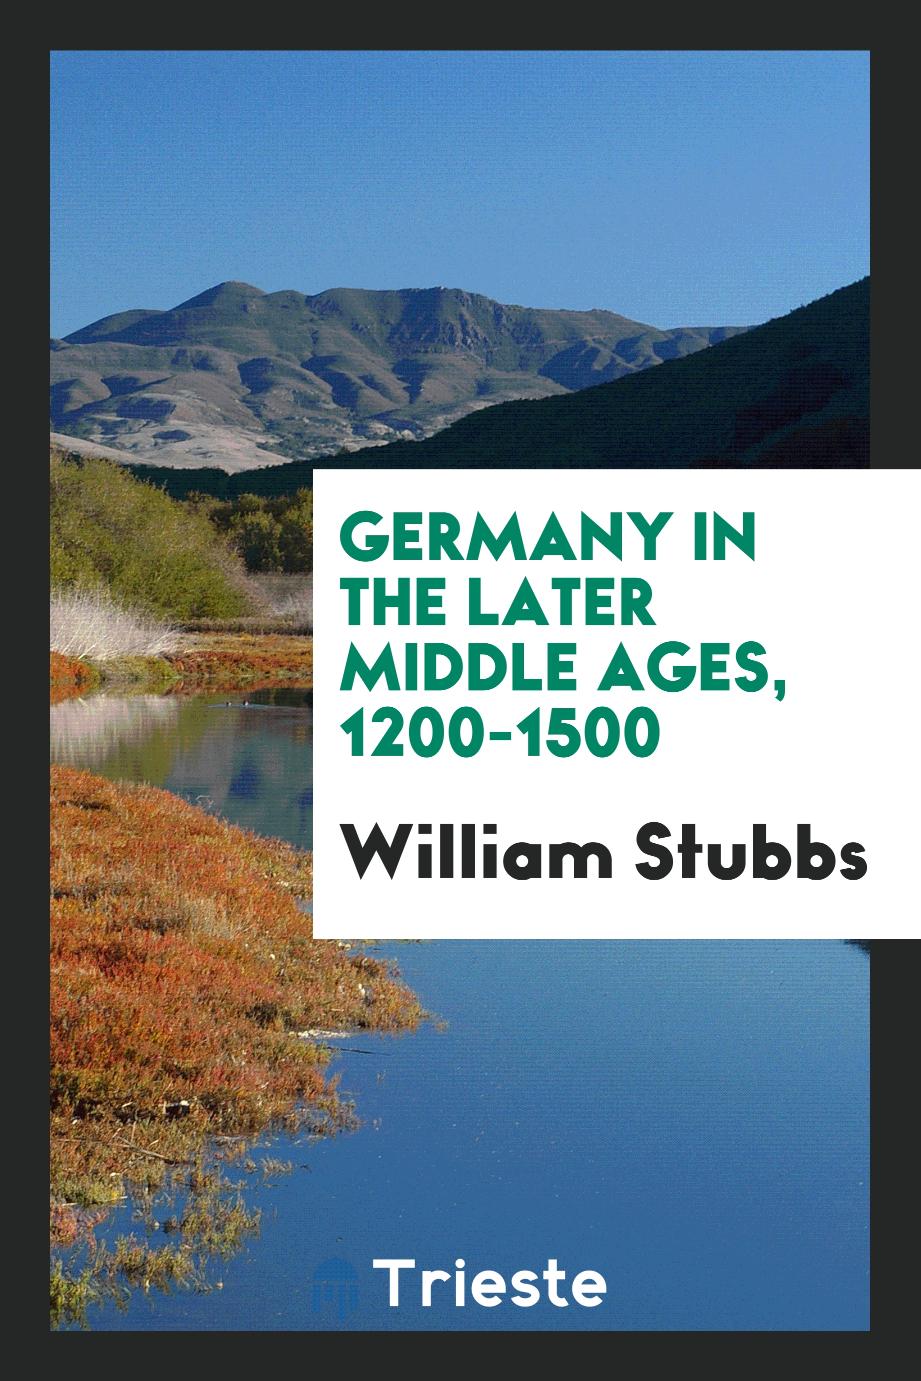 Germany in the later Middle Ages, 1200-1500